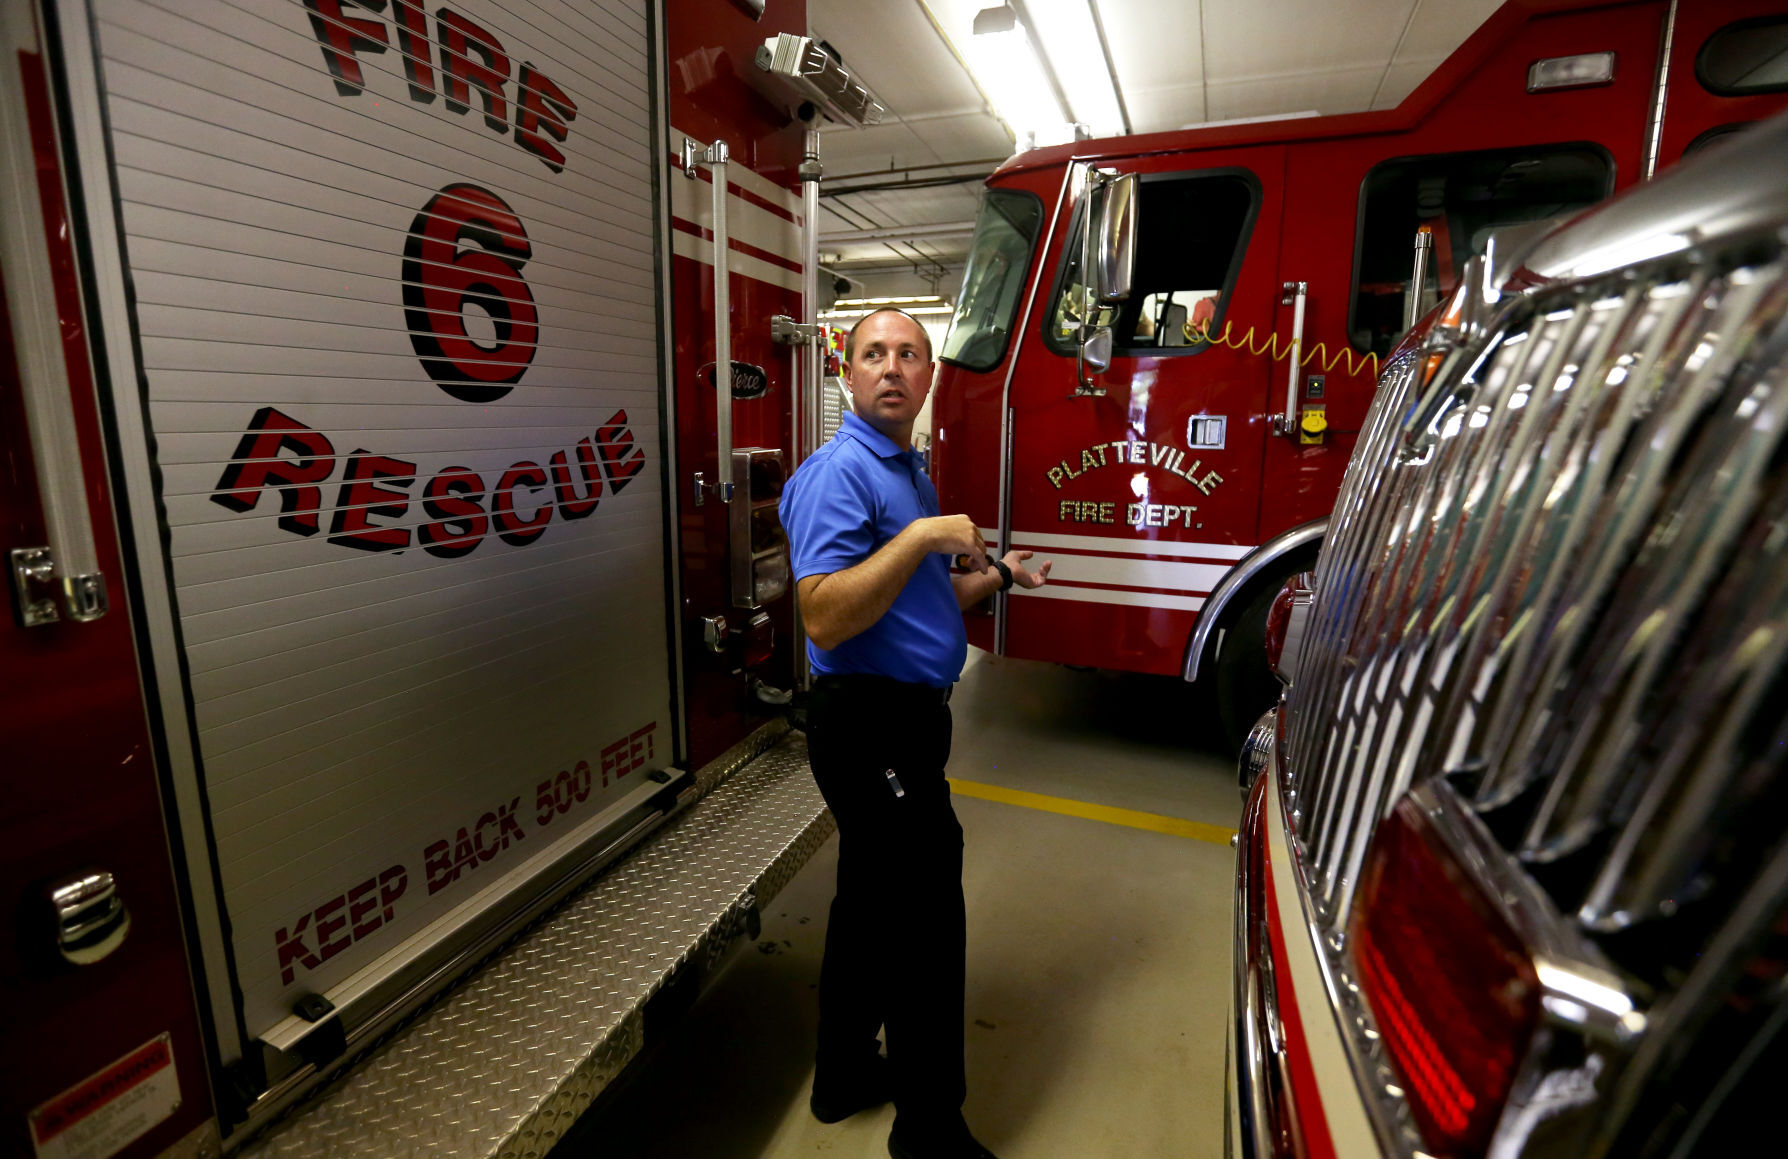 Platteville Fire Chief Ryan Simmons works at the station that was built in 1964. A new fire station is one of the top projects on the list of city officials as they work through infrastructure plans through 2026.    PHOTO CREDIT: EILEEN MESLAR